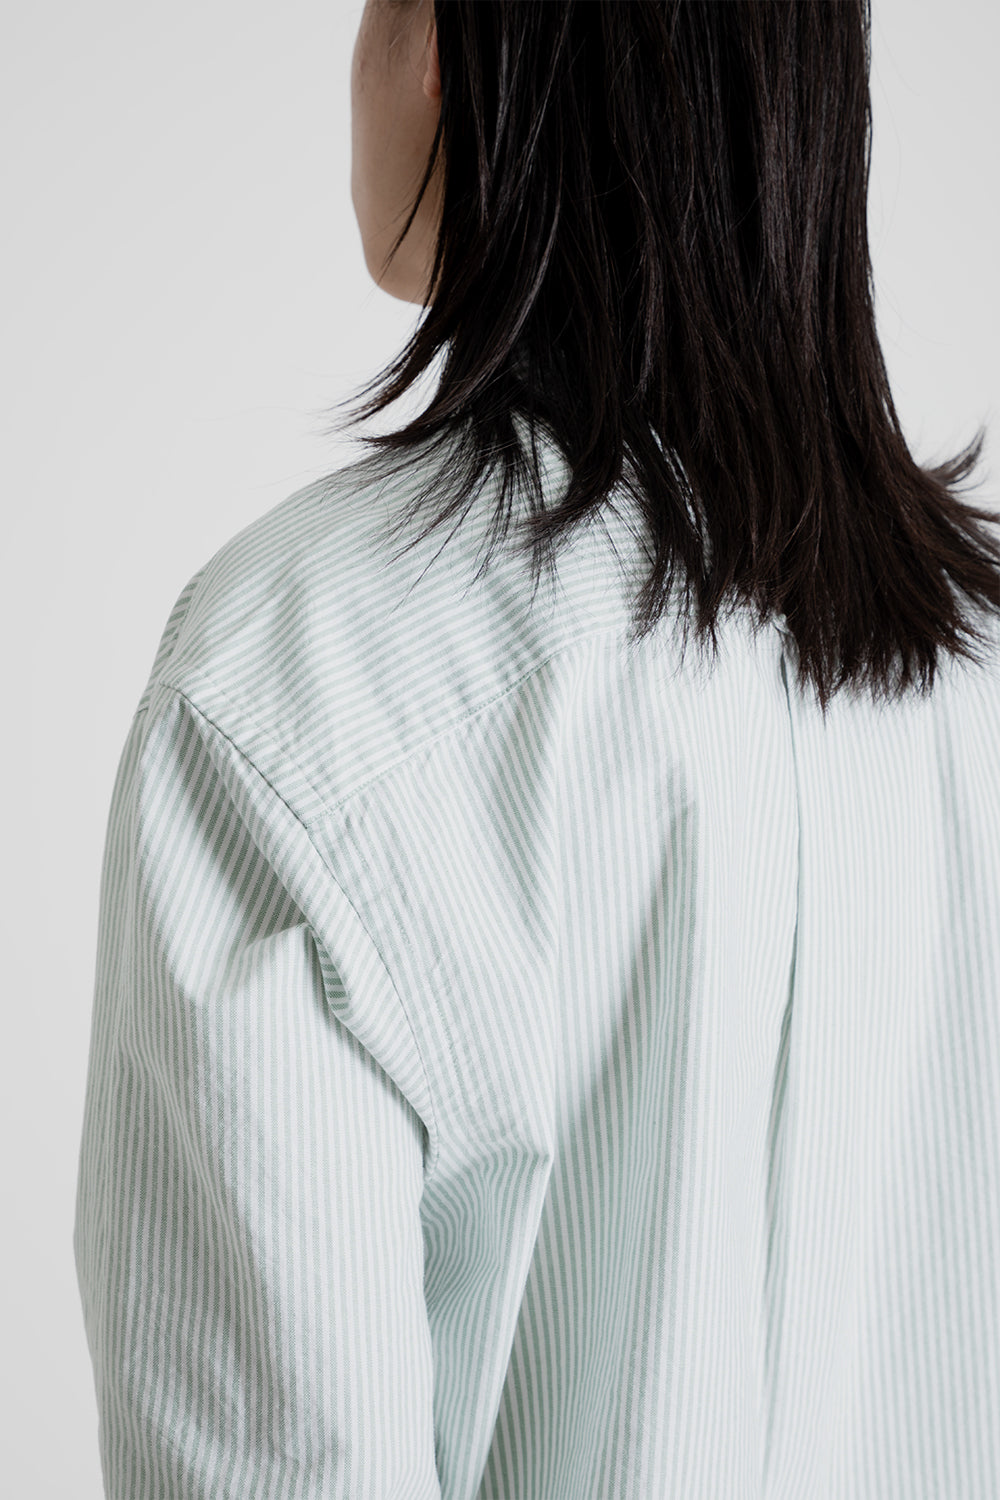 Frizmworks_Stripe_Cotton_Relaxed_Shirt_Green